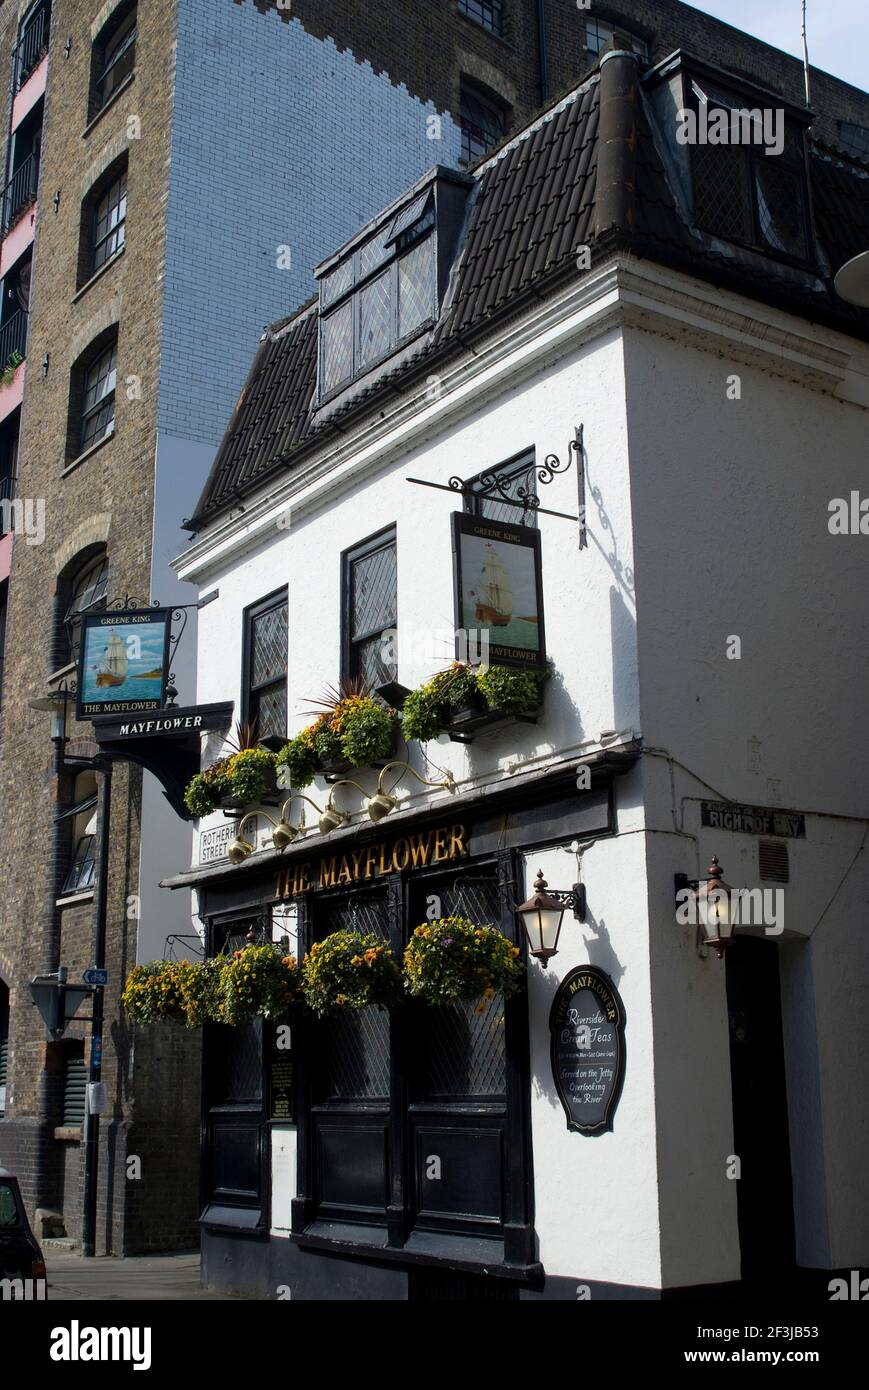 The historic 17th century Mayflower Pub, near the River Thames, Rotherhithe, London, SE16, England | NONE | Stock Photo